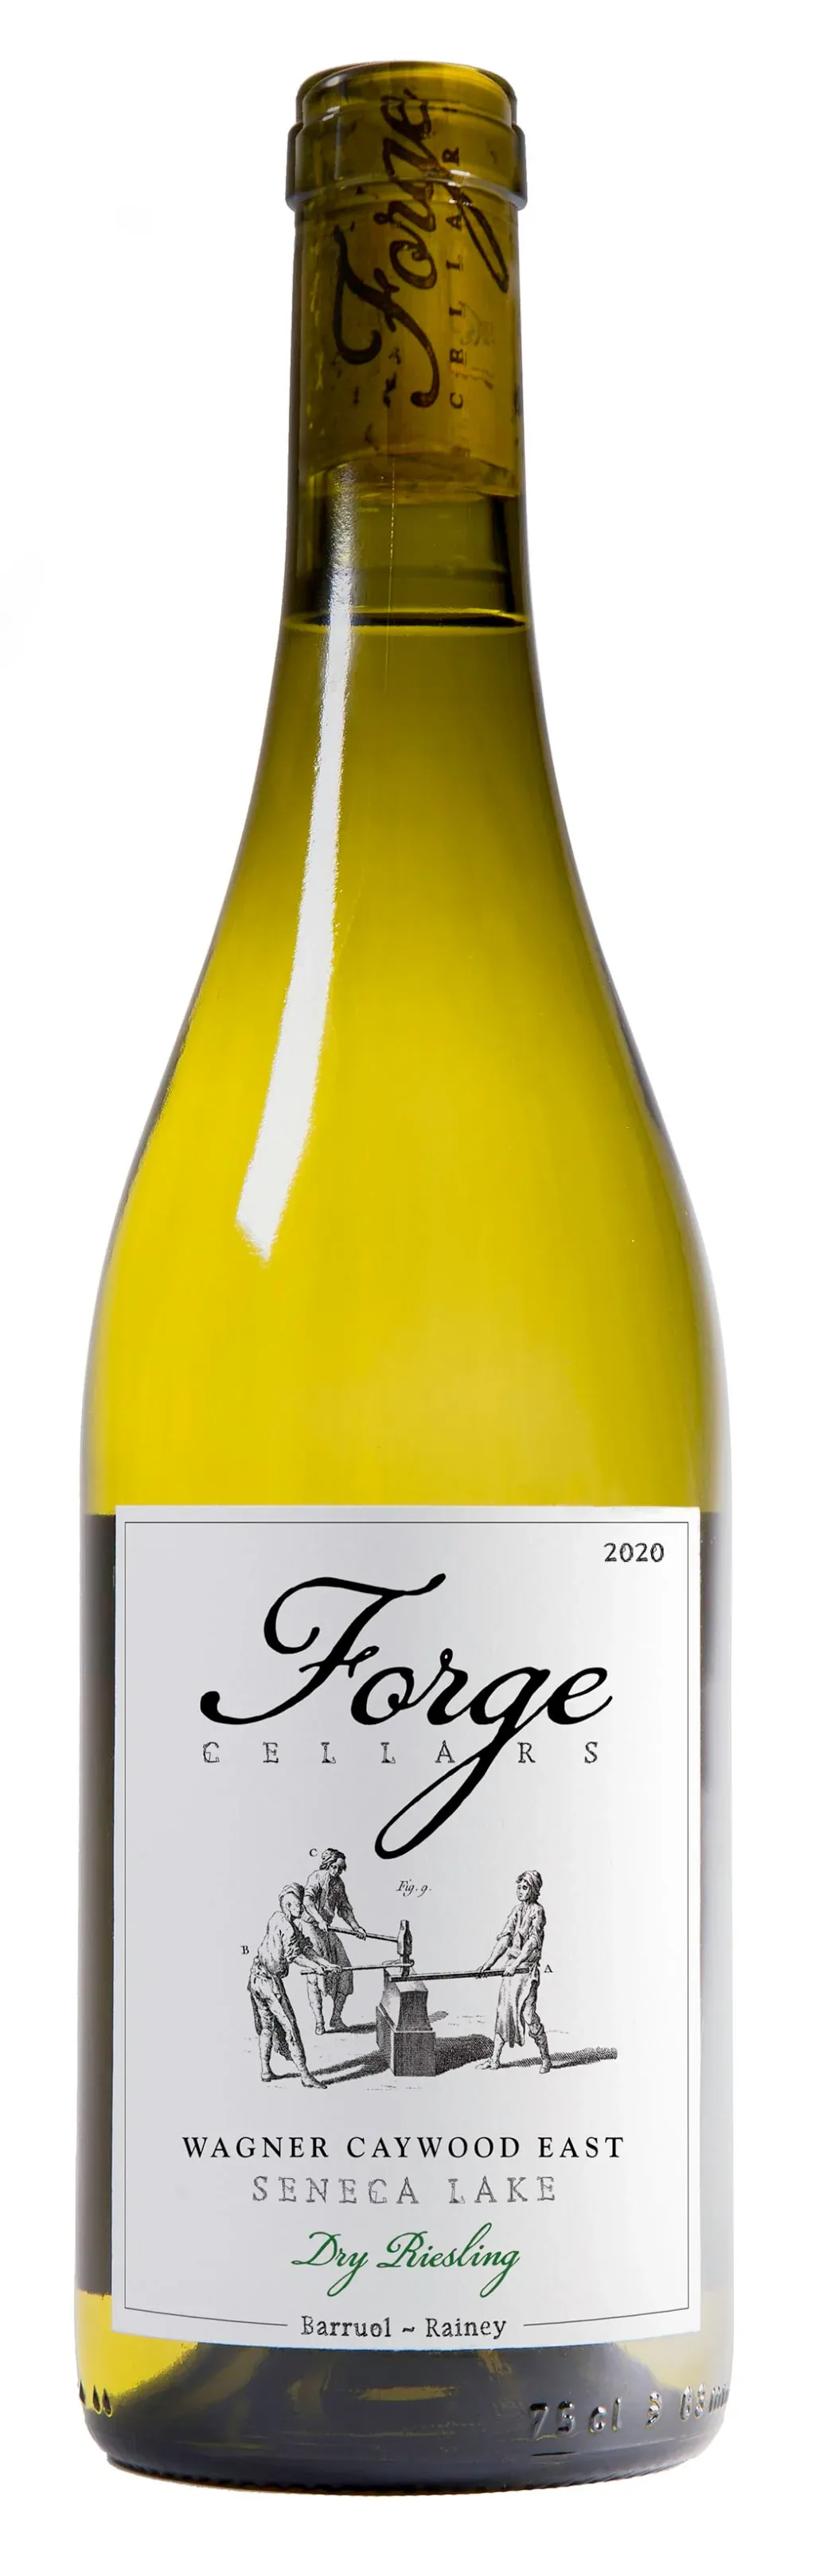 Bottle of Forge Cellars Wagner Caywood East Dry Riesling from search results